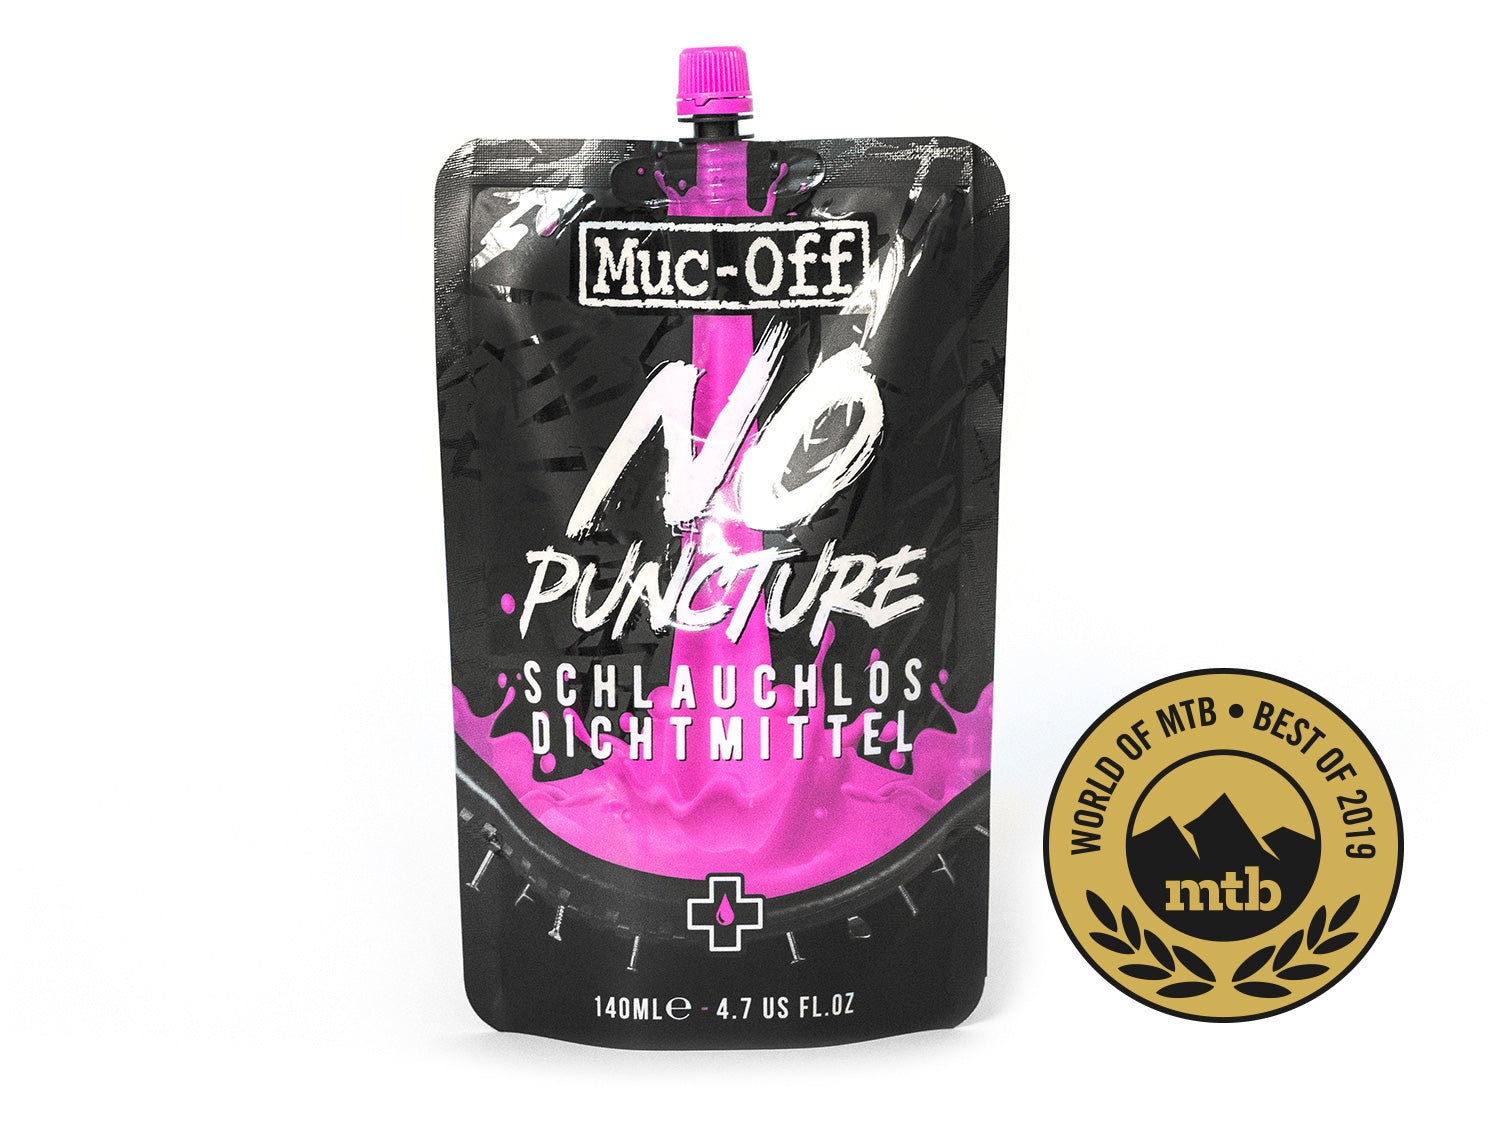 Muc-Off No Puncture Hassle Pouch 140ml - Tubeless Dichtmilch